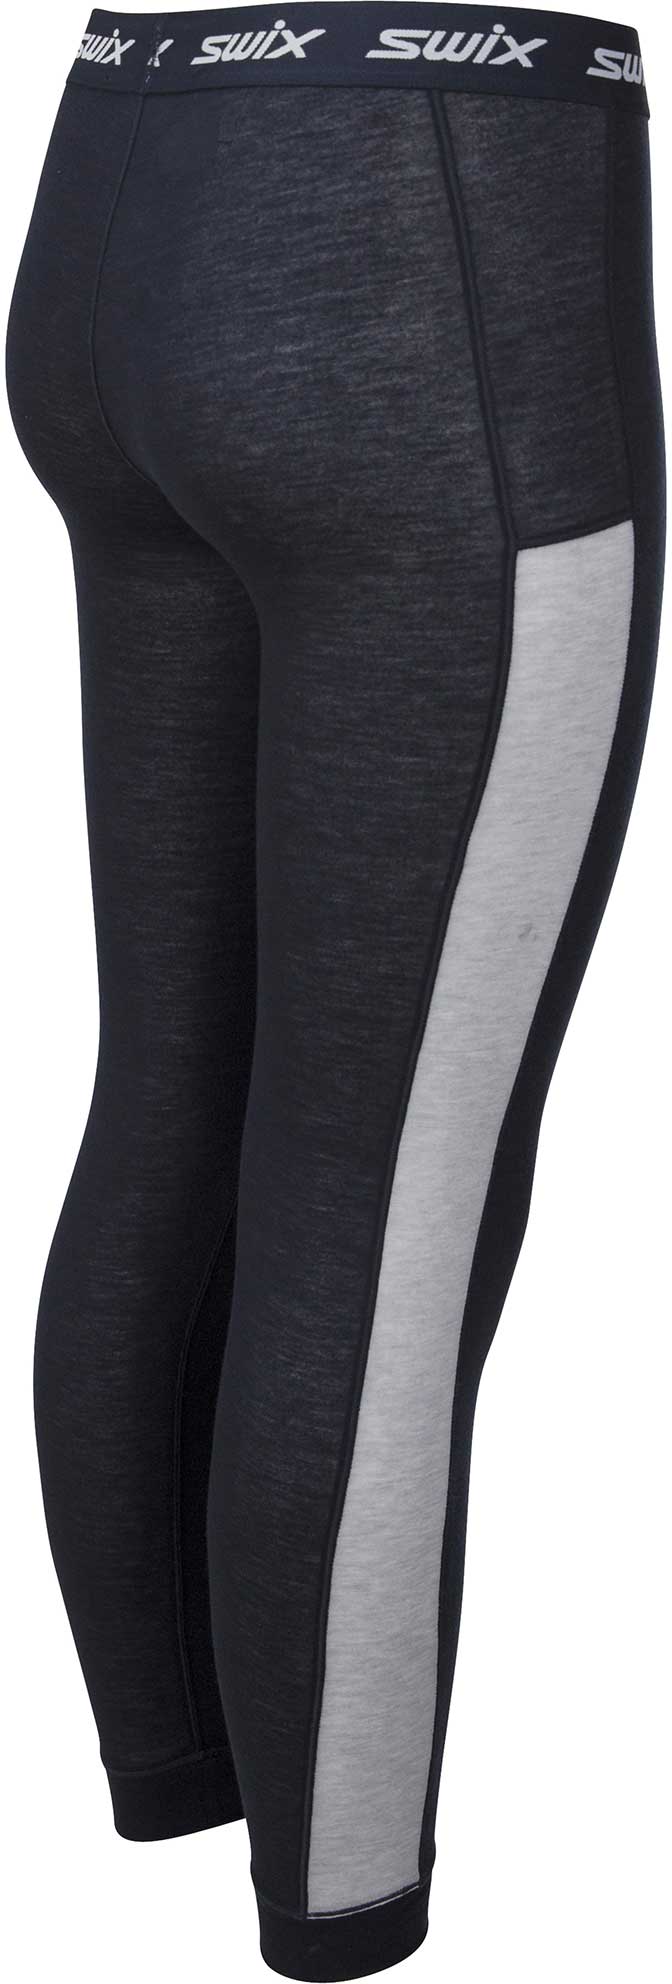 Women’s functional tights